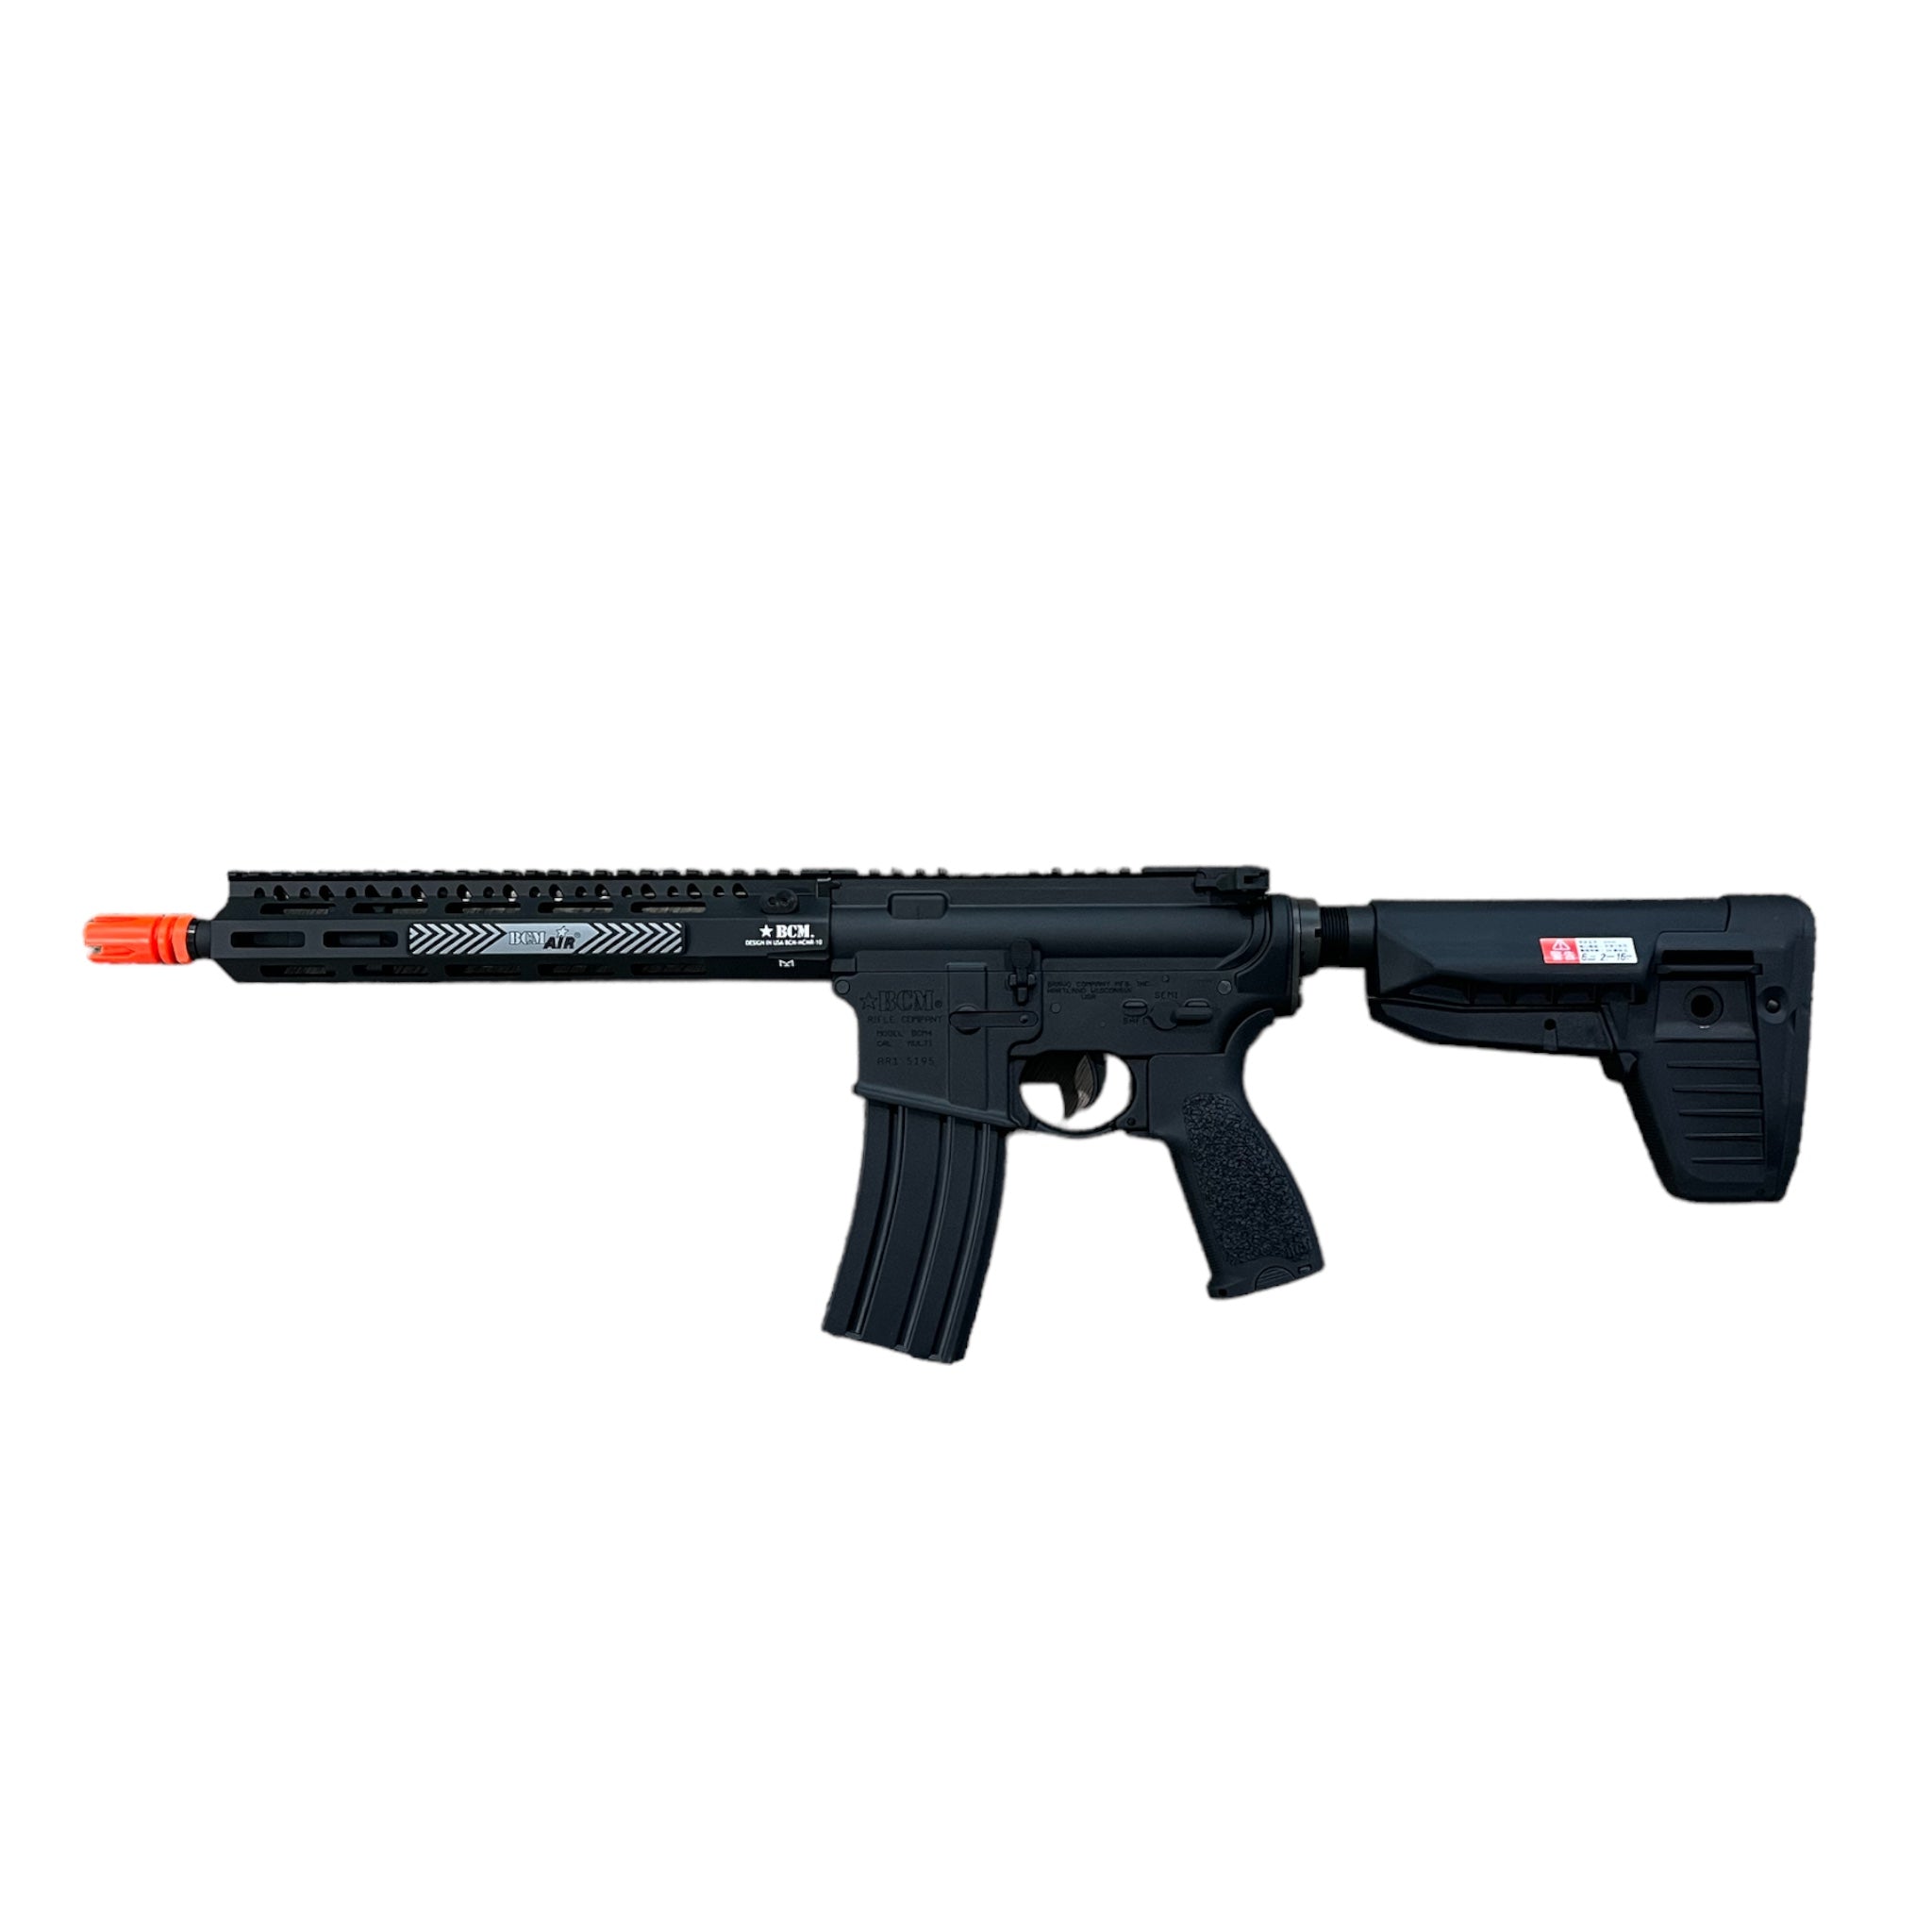 BCM AIR GUNFIGHTER AR-15 Airsoft AEG w/ Avalon Gearbox & GATE ASTER Programmable MOSFET by VFC (Model: 11.5